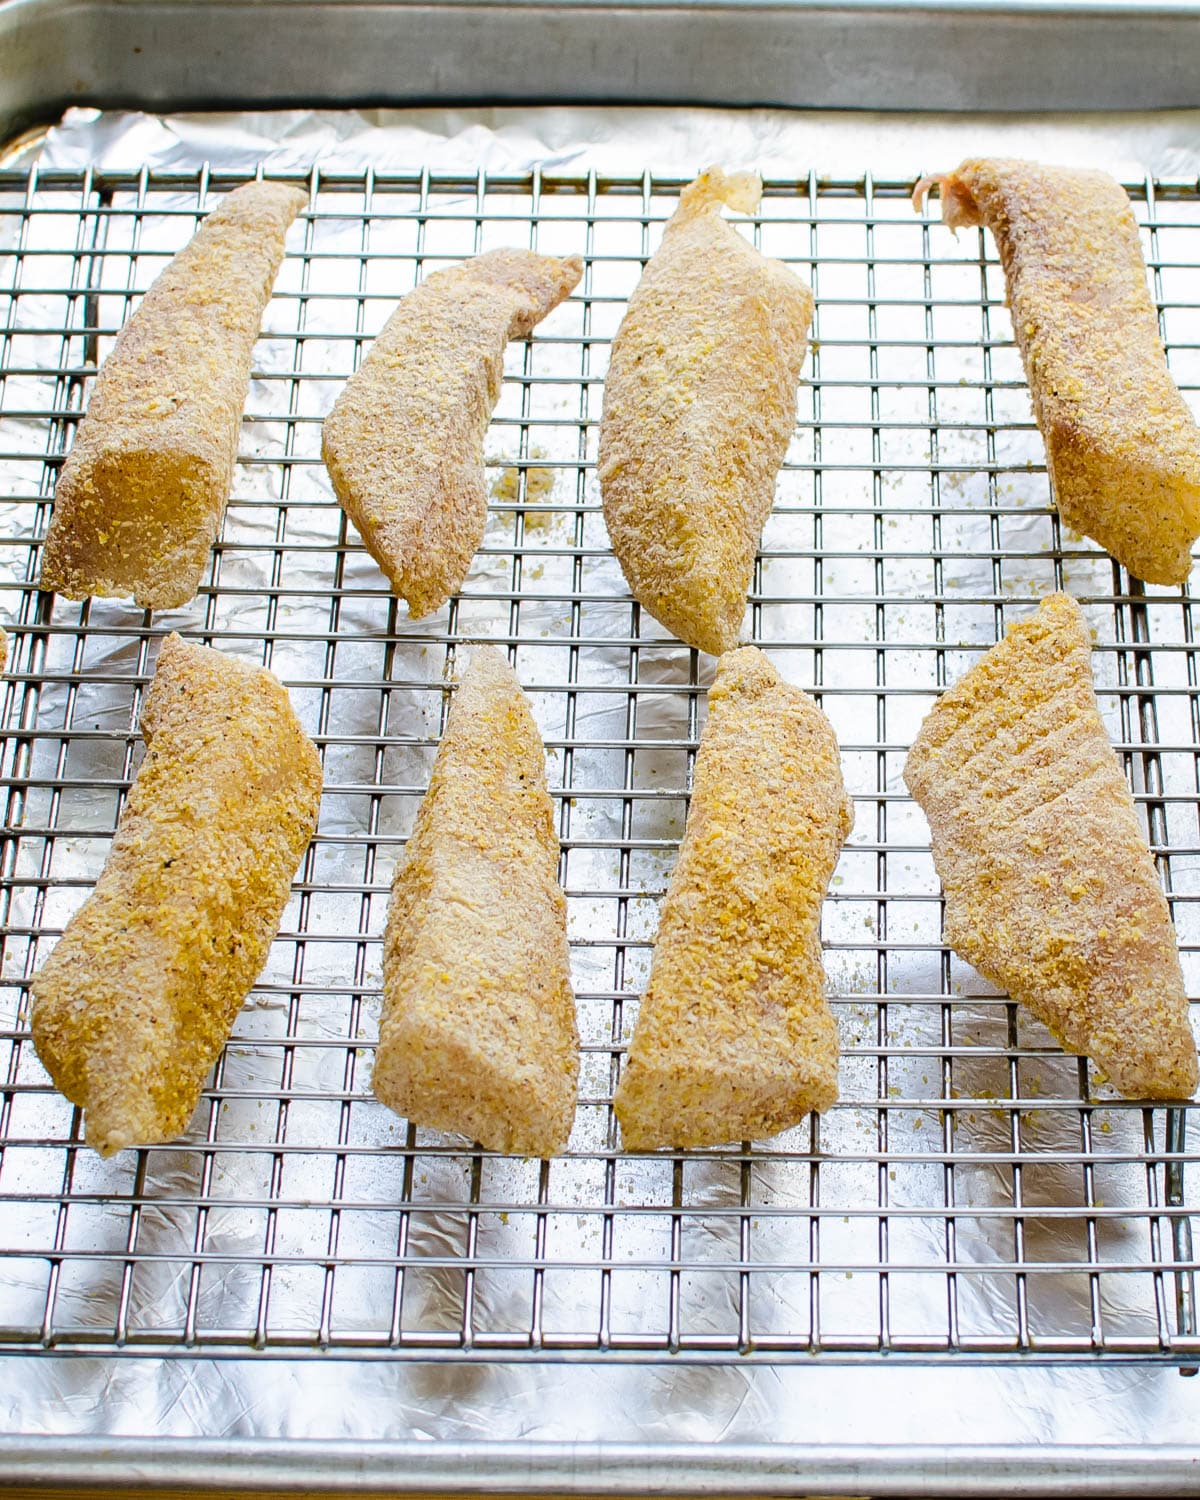 Baking the cornmeal crusted fish on a wire rack.